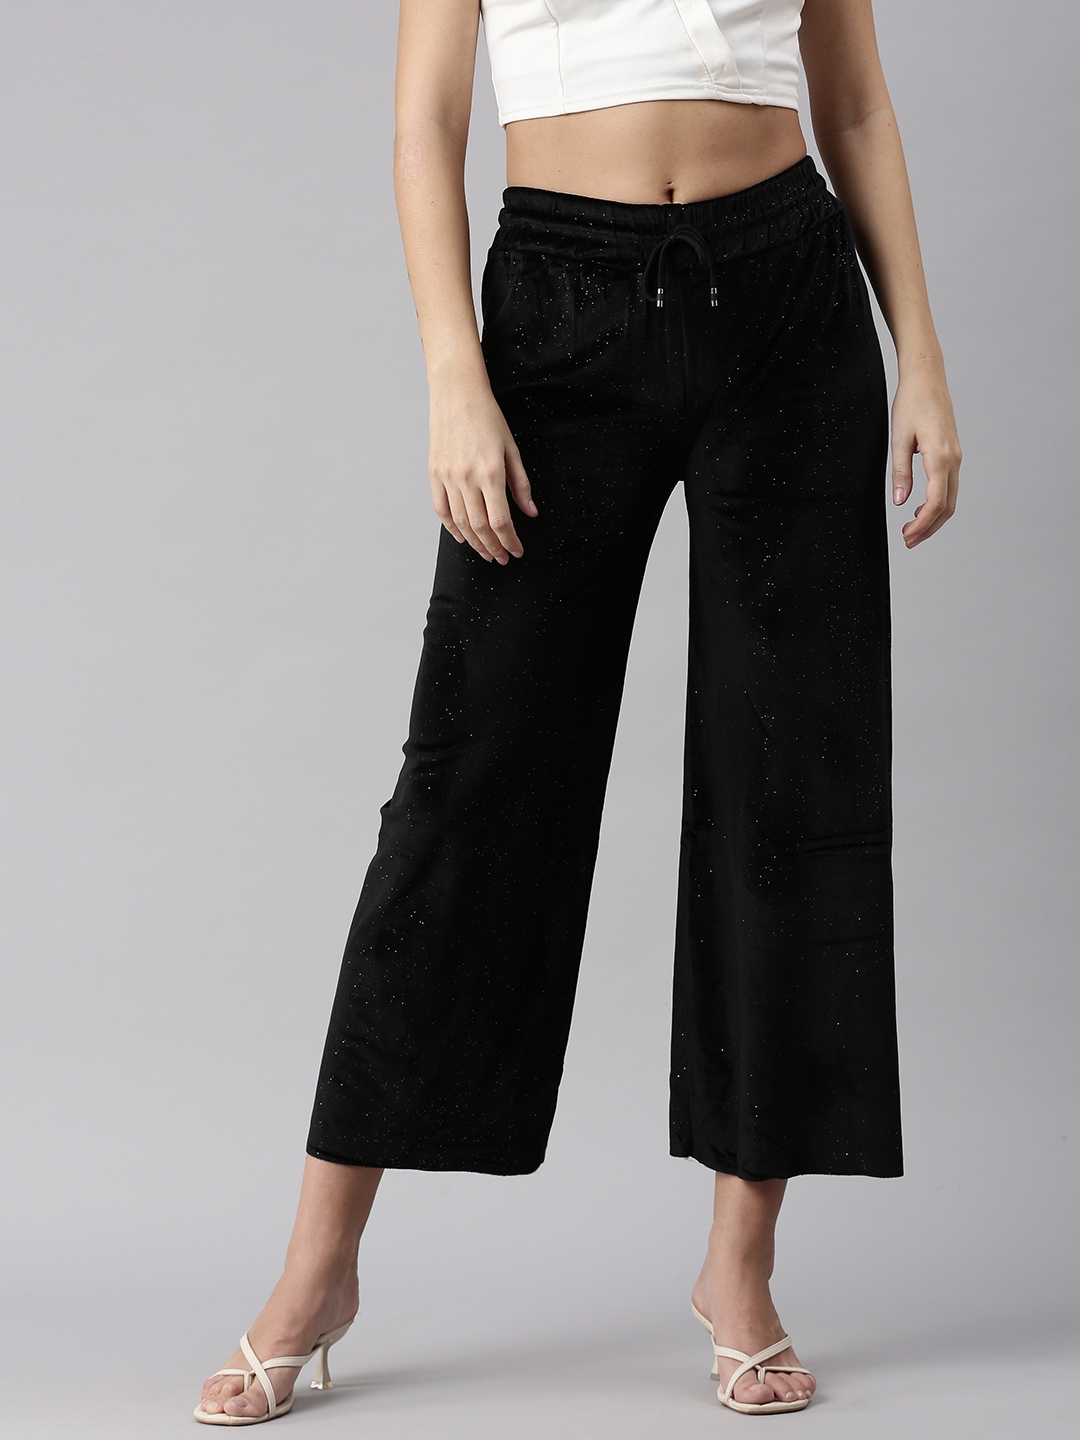 SHOWOFF Women's Solid High-Rise Black Trousers